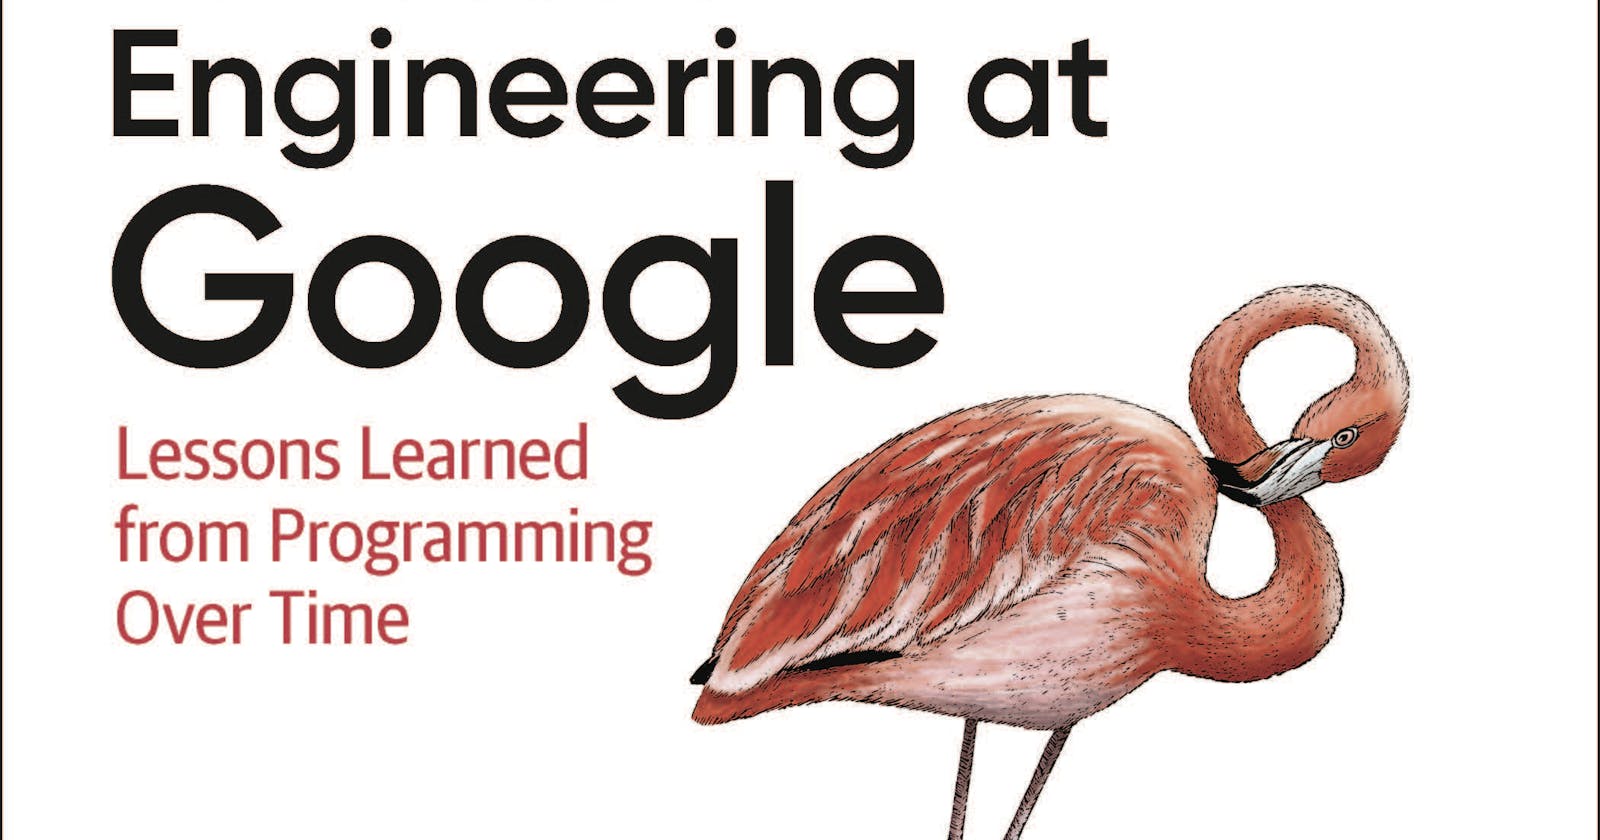 Book Review: Software Engineering at Google (Part 2)